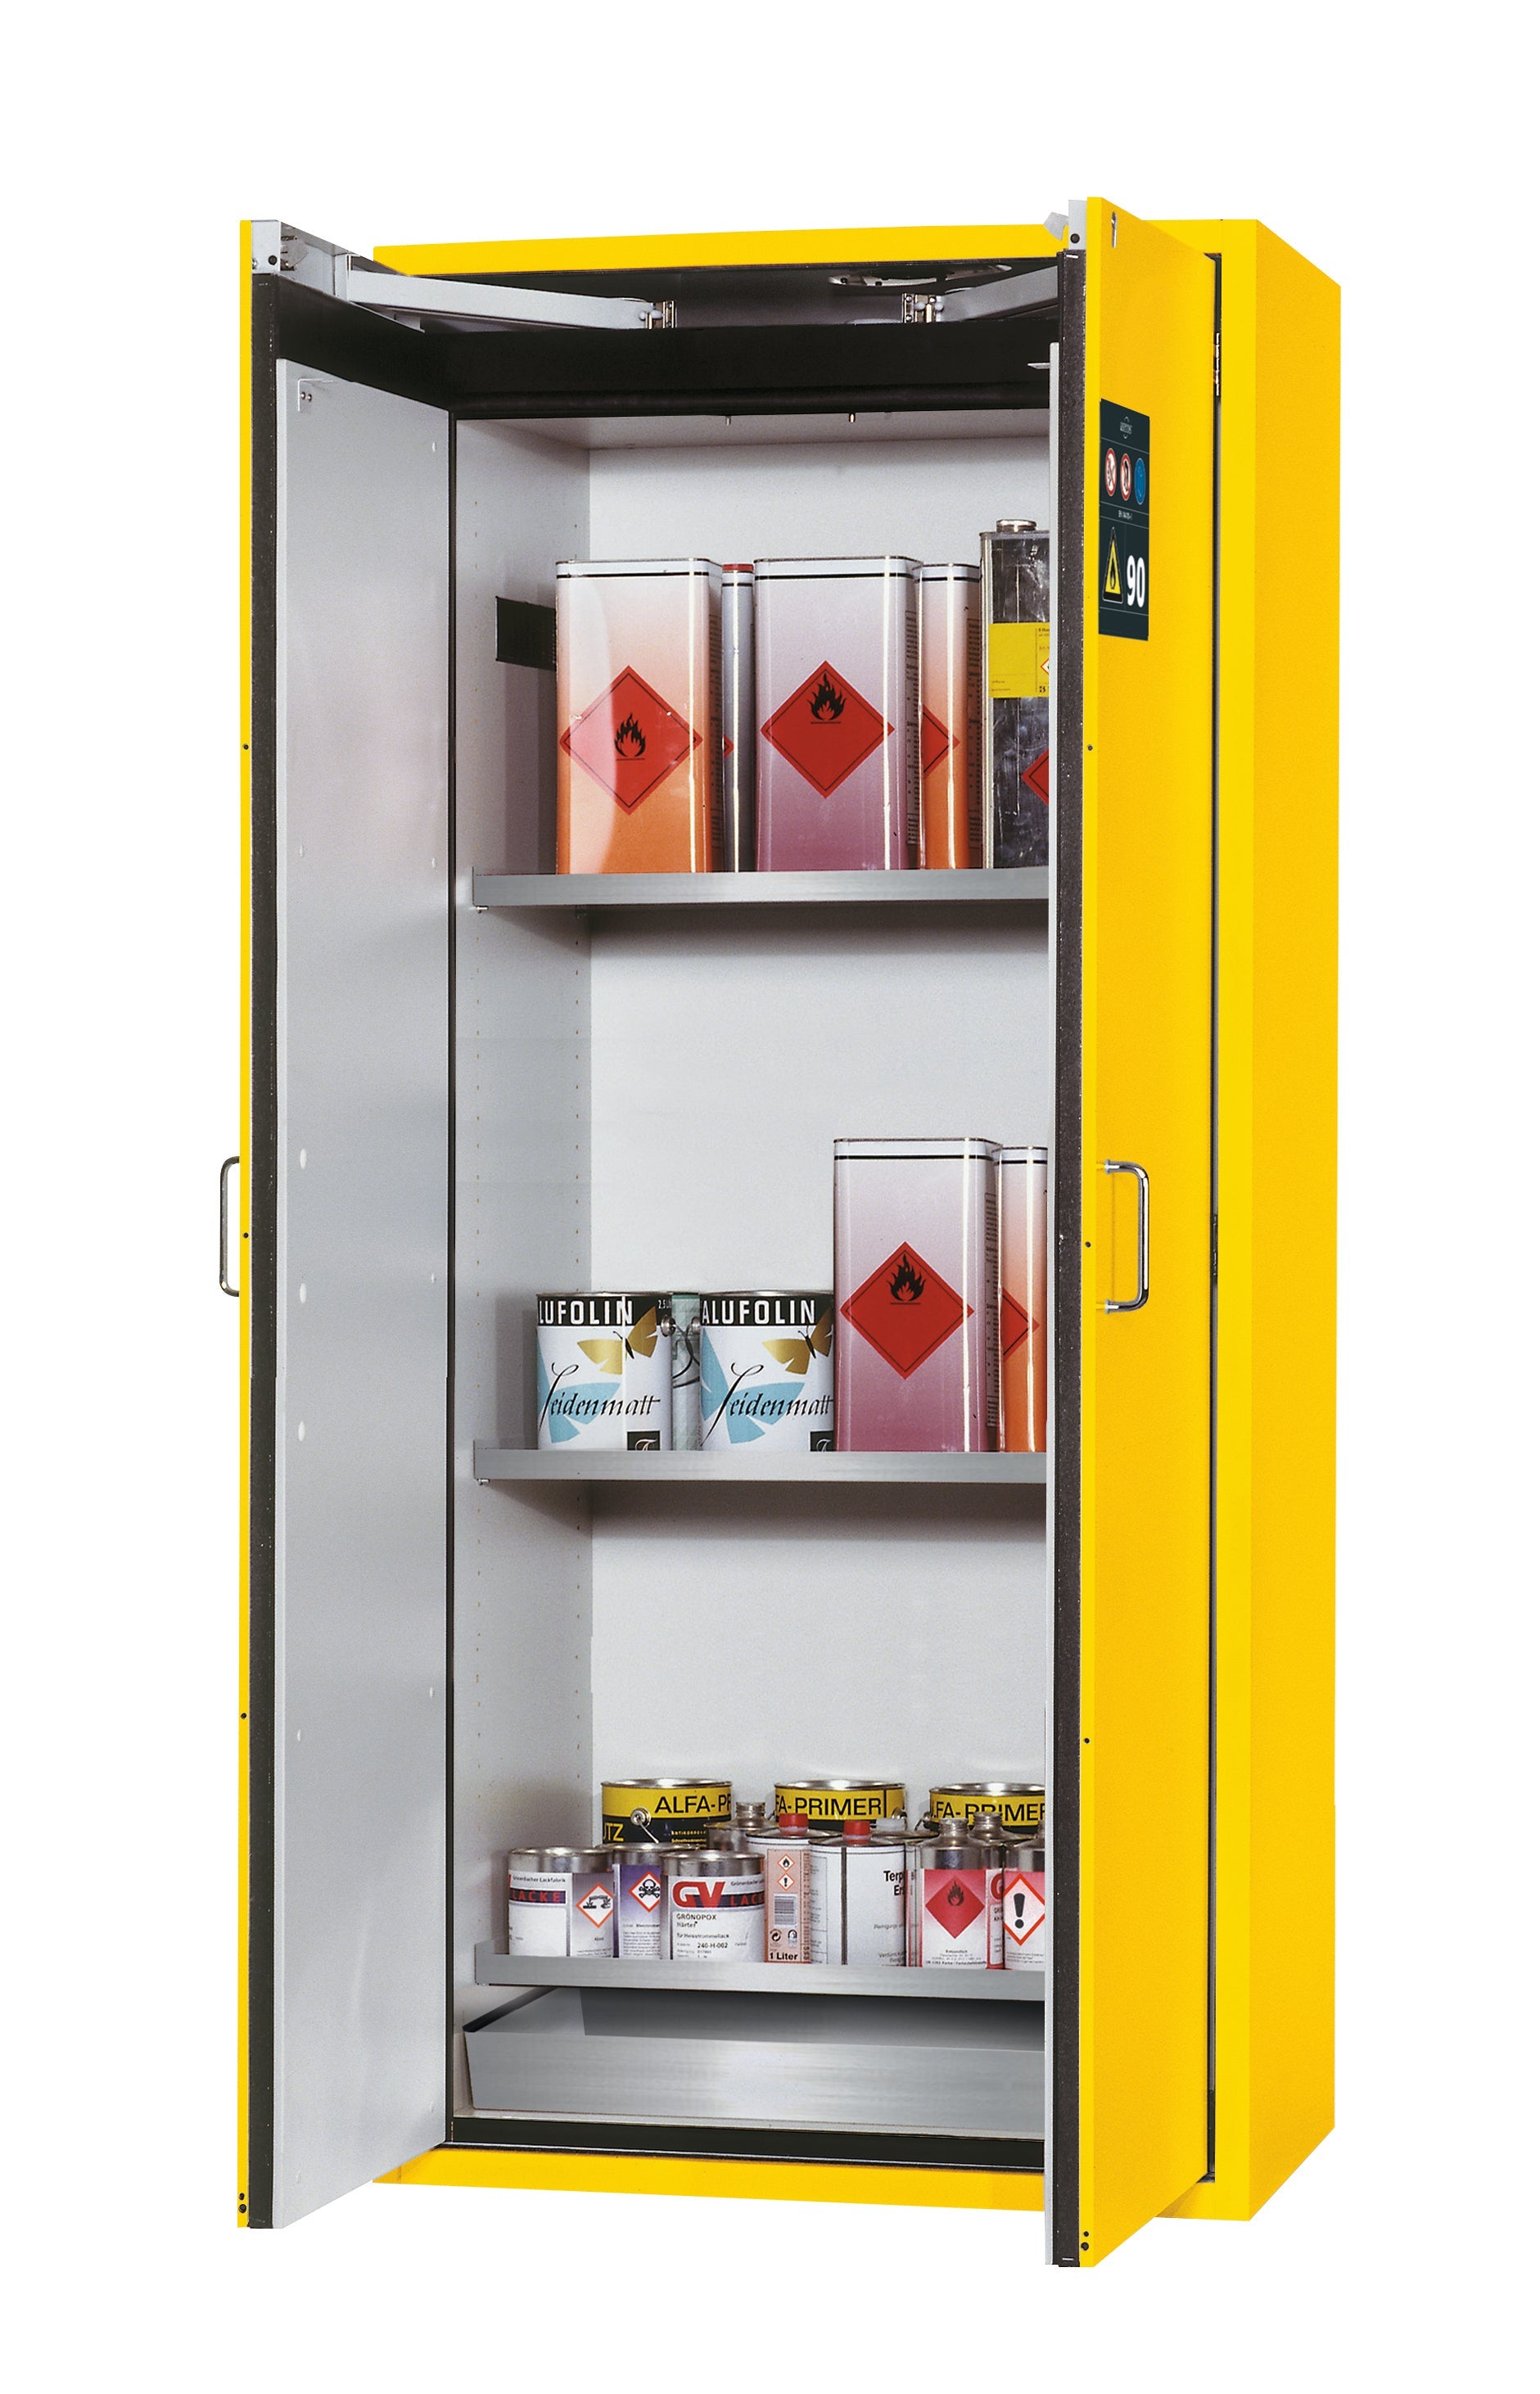 Type 90 safety cabinet S-CLASSIC-90 model S90.196.090 in safety yellow RAL 1004 with 3x standard shelves (stainless steel 1.4301)